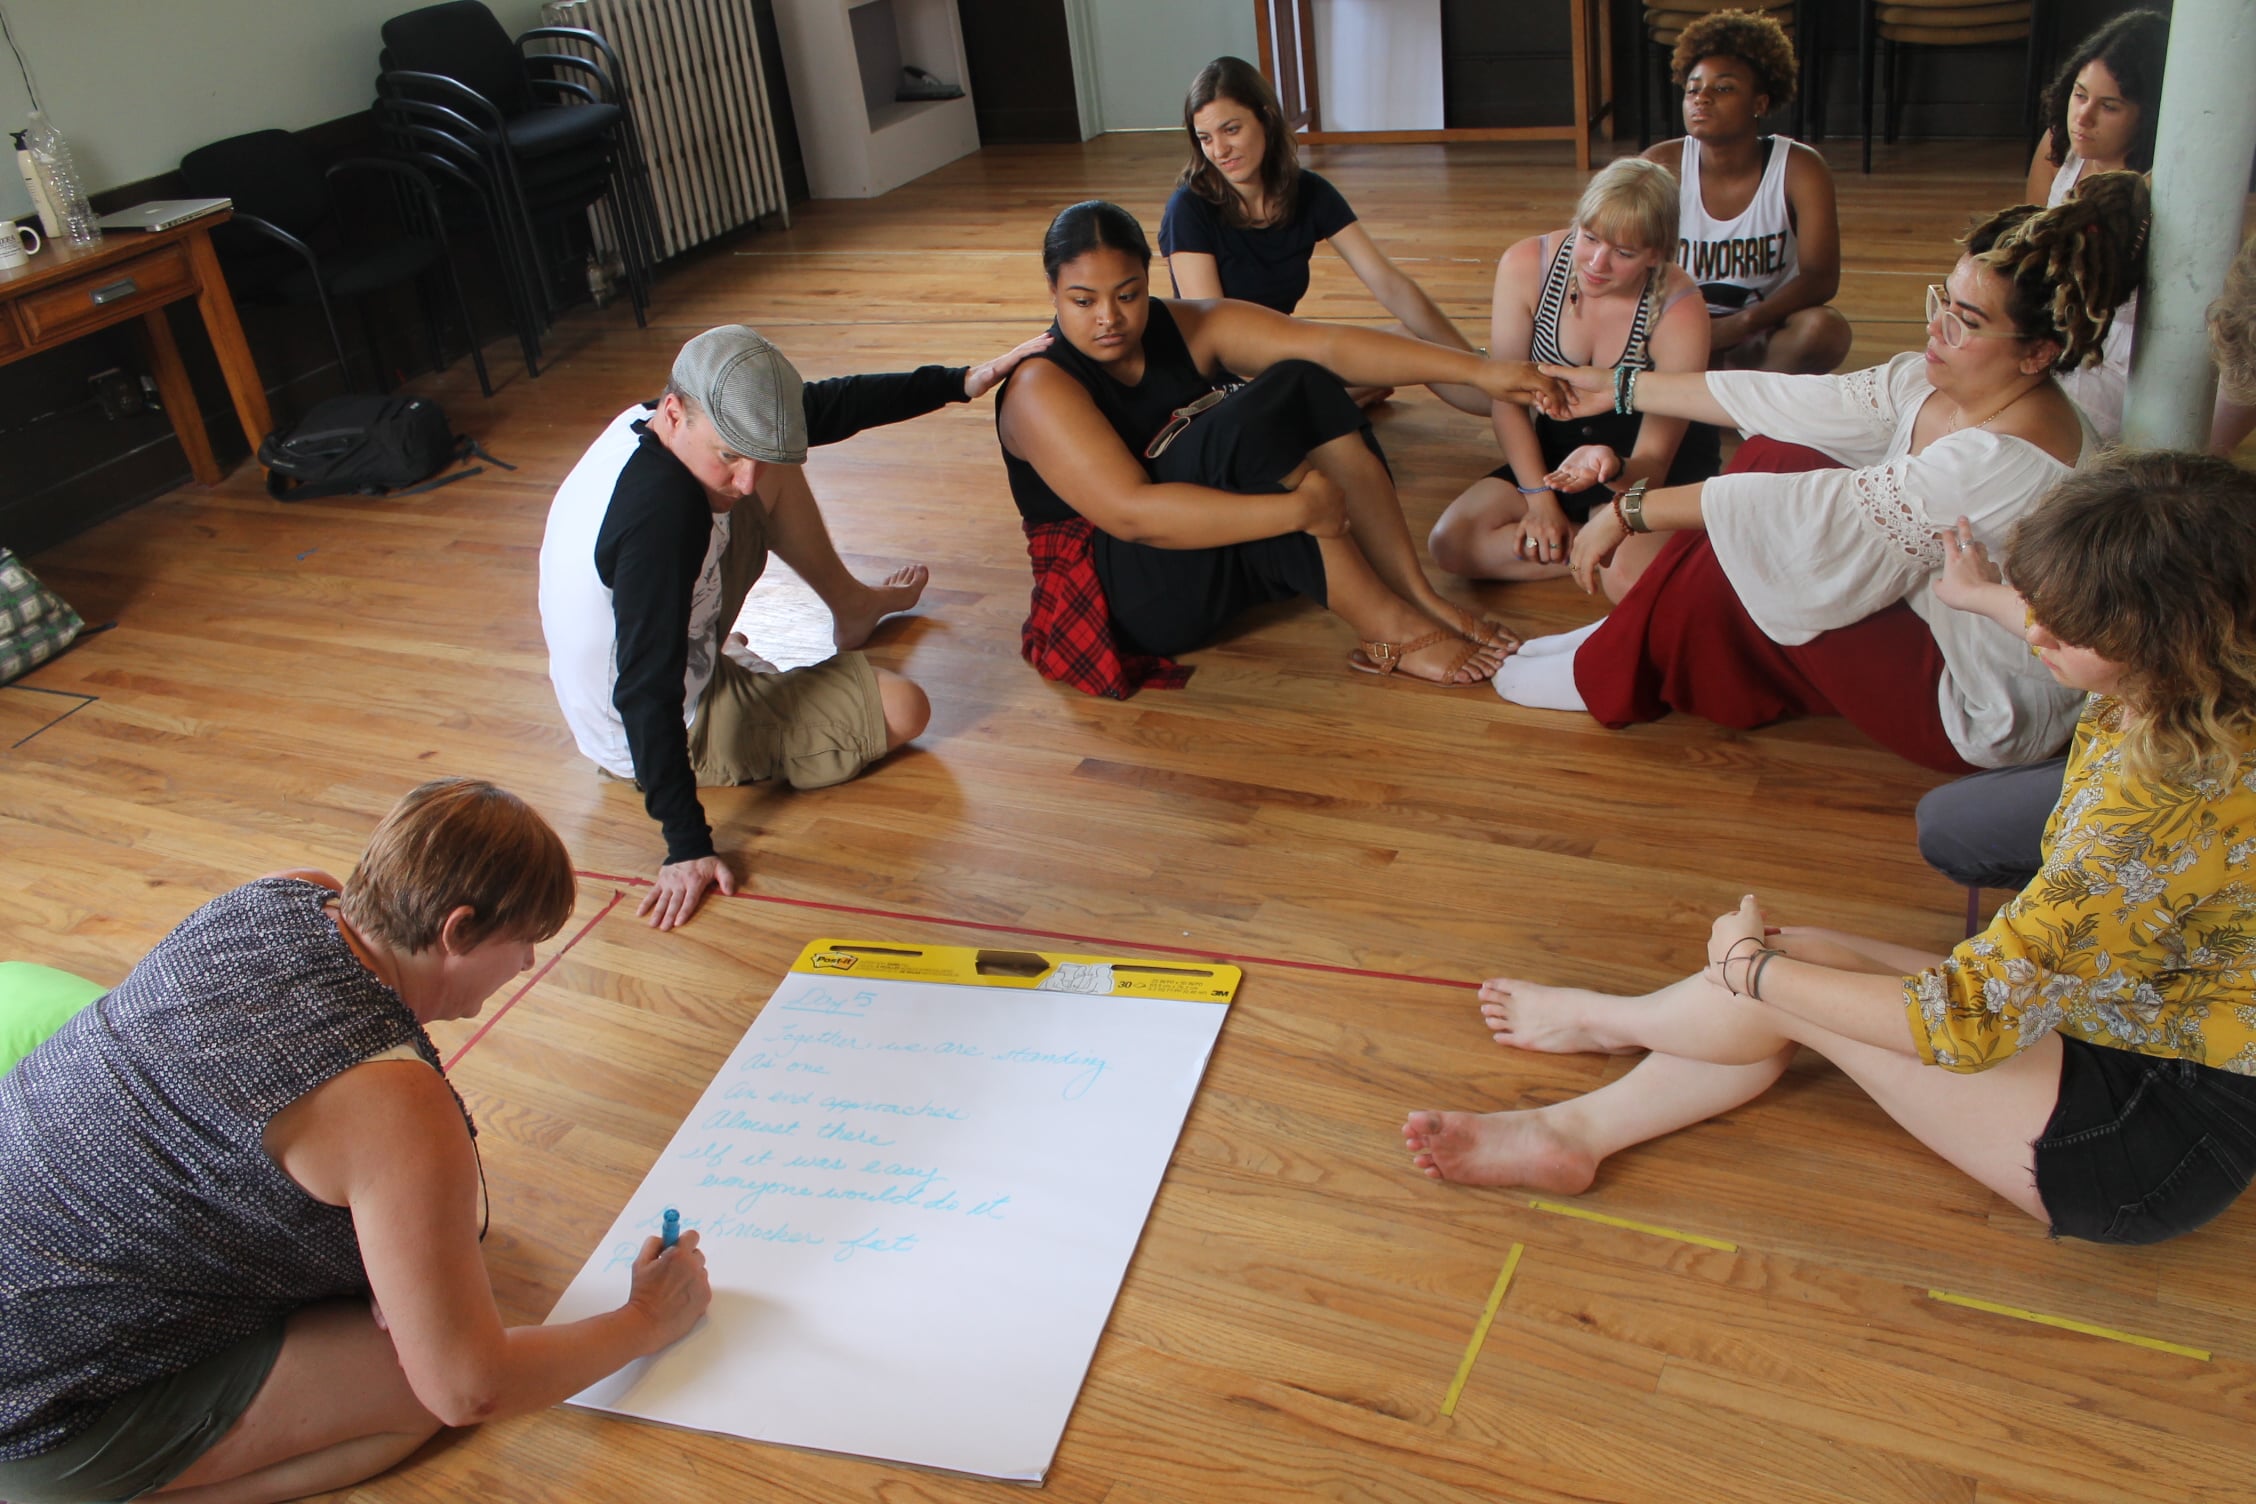 Actors sit together on the floor and participate in team-building activities.